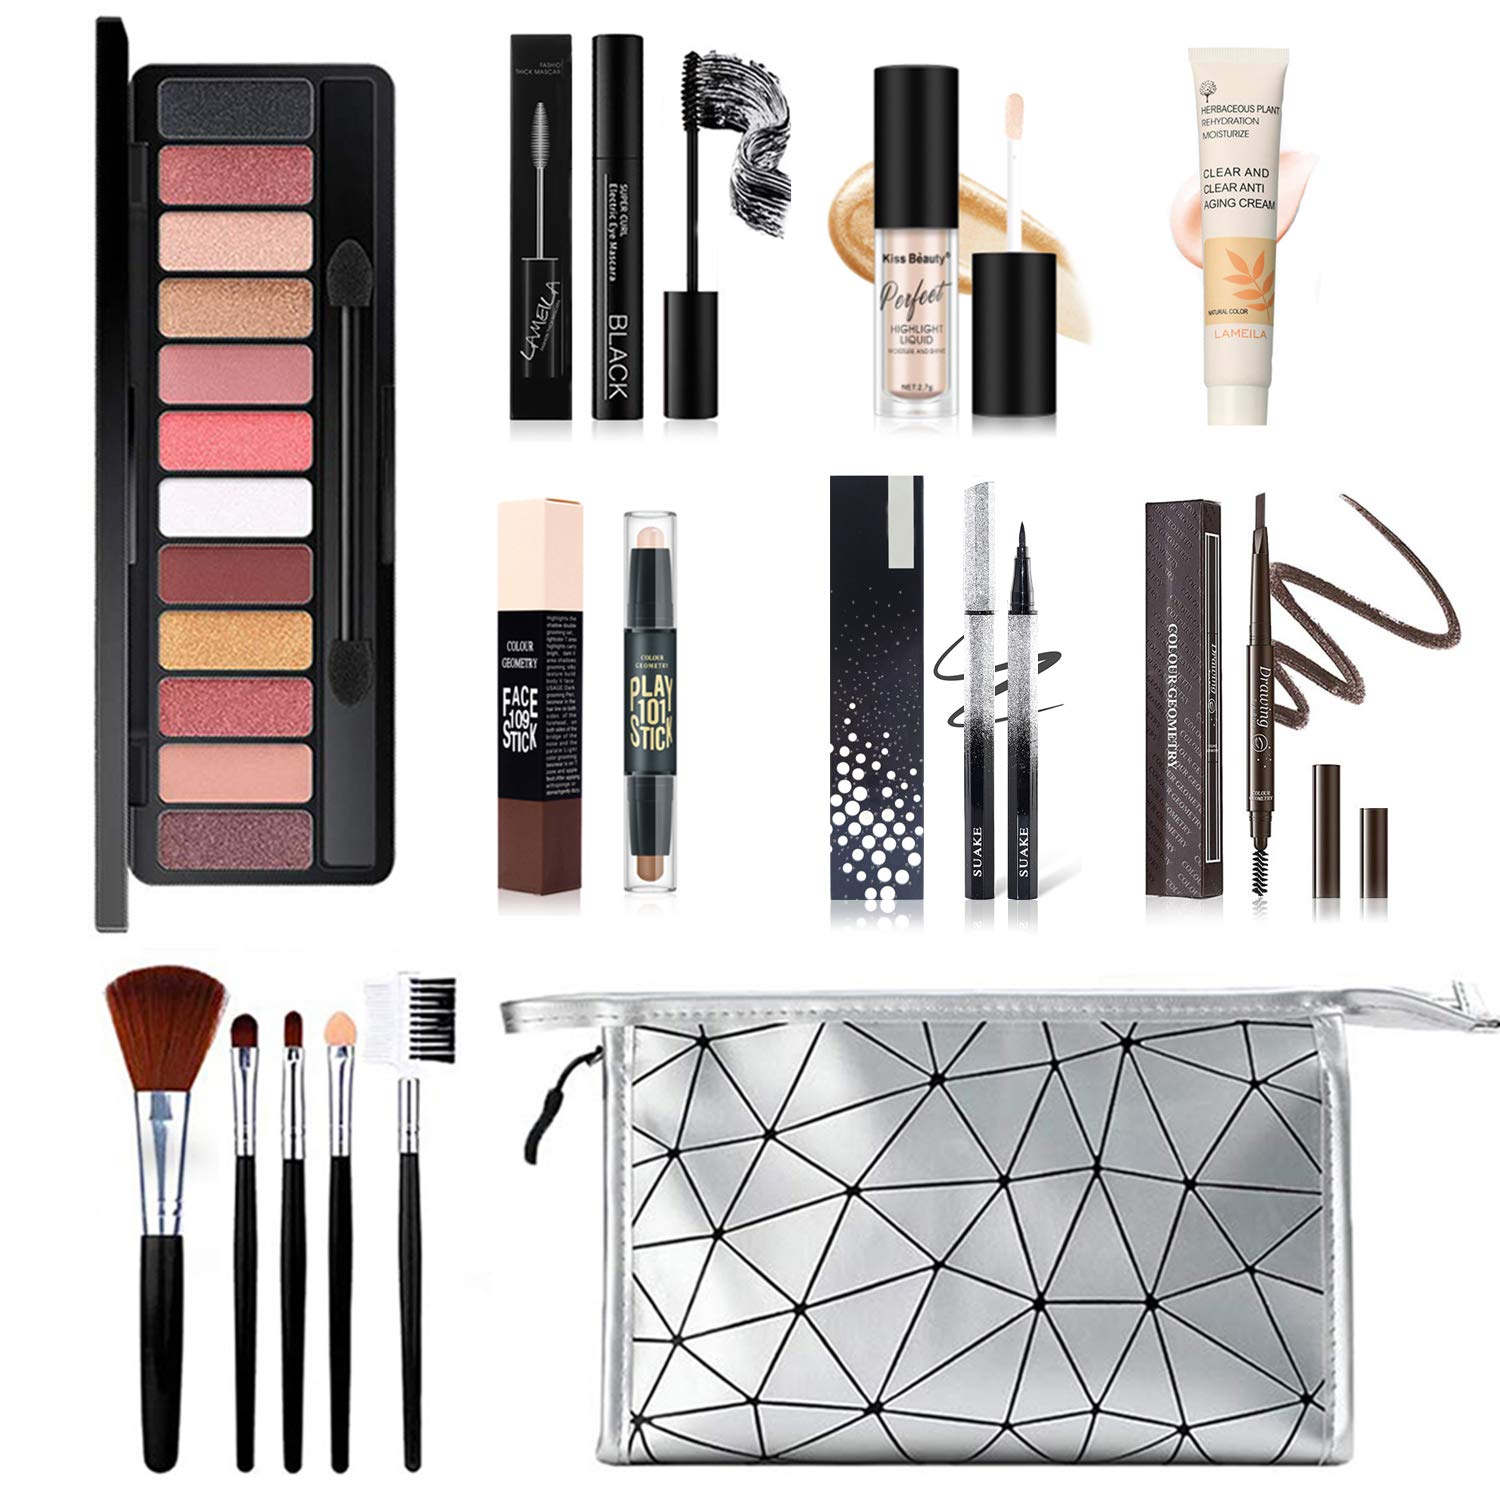 All in One Makeup Kit, 12 Eyeshadow Palette, 5PCS Brush Eyebrow Pencil, &